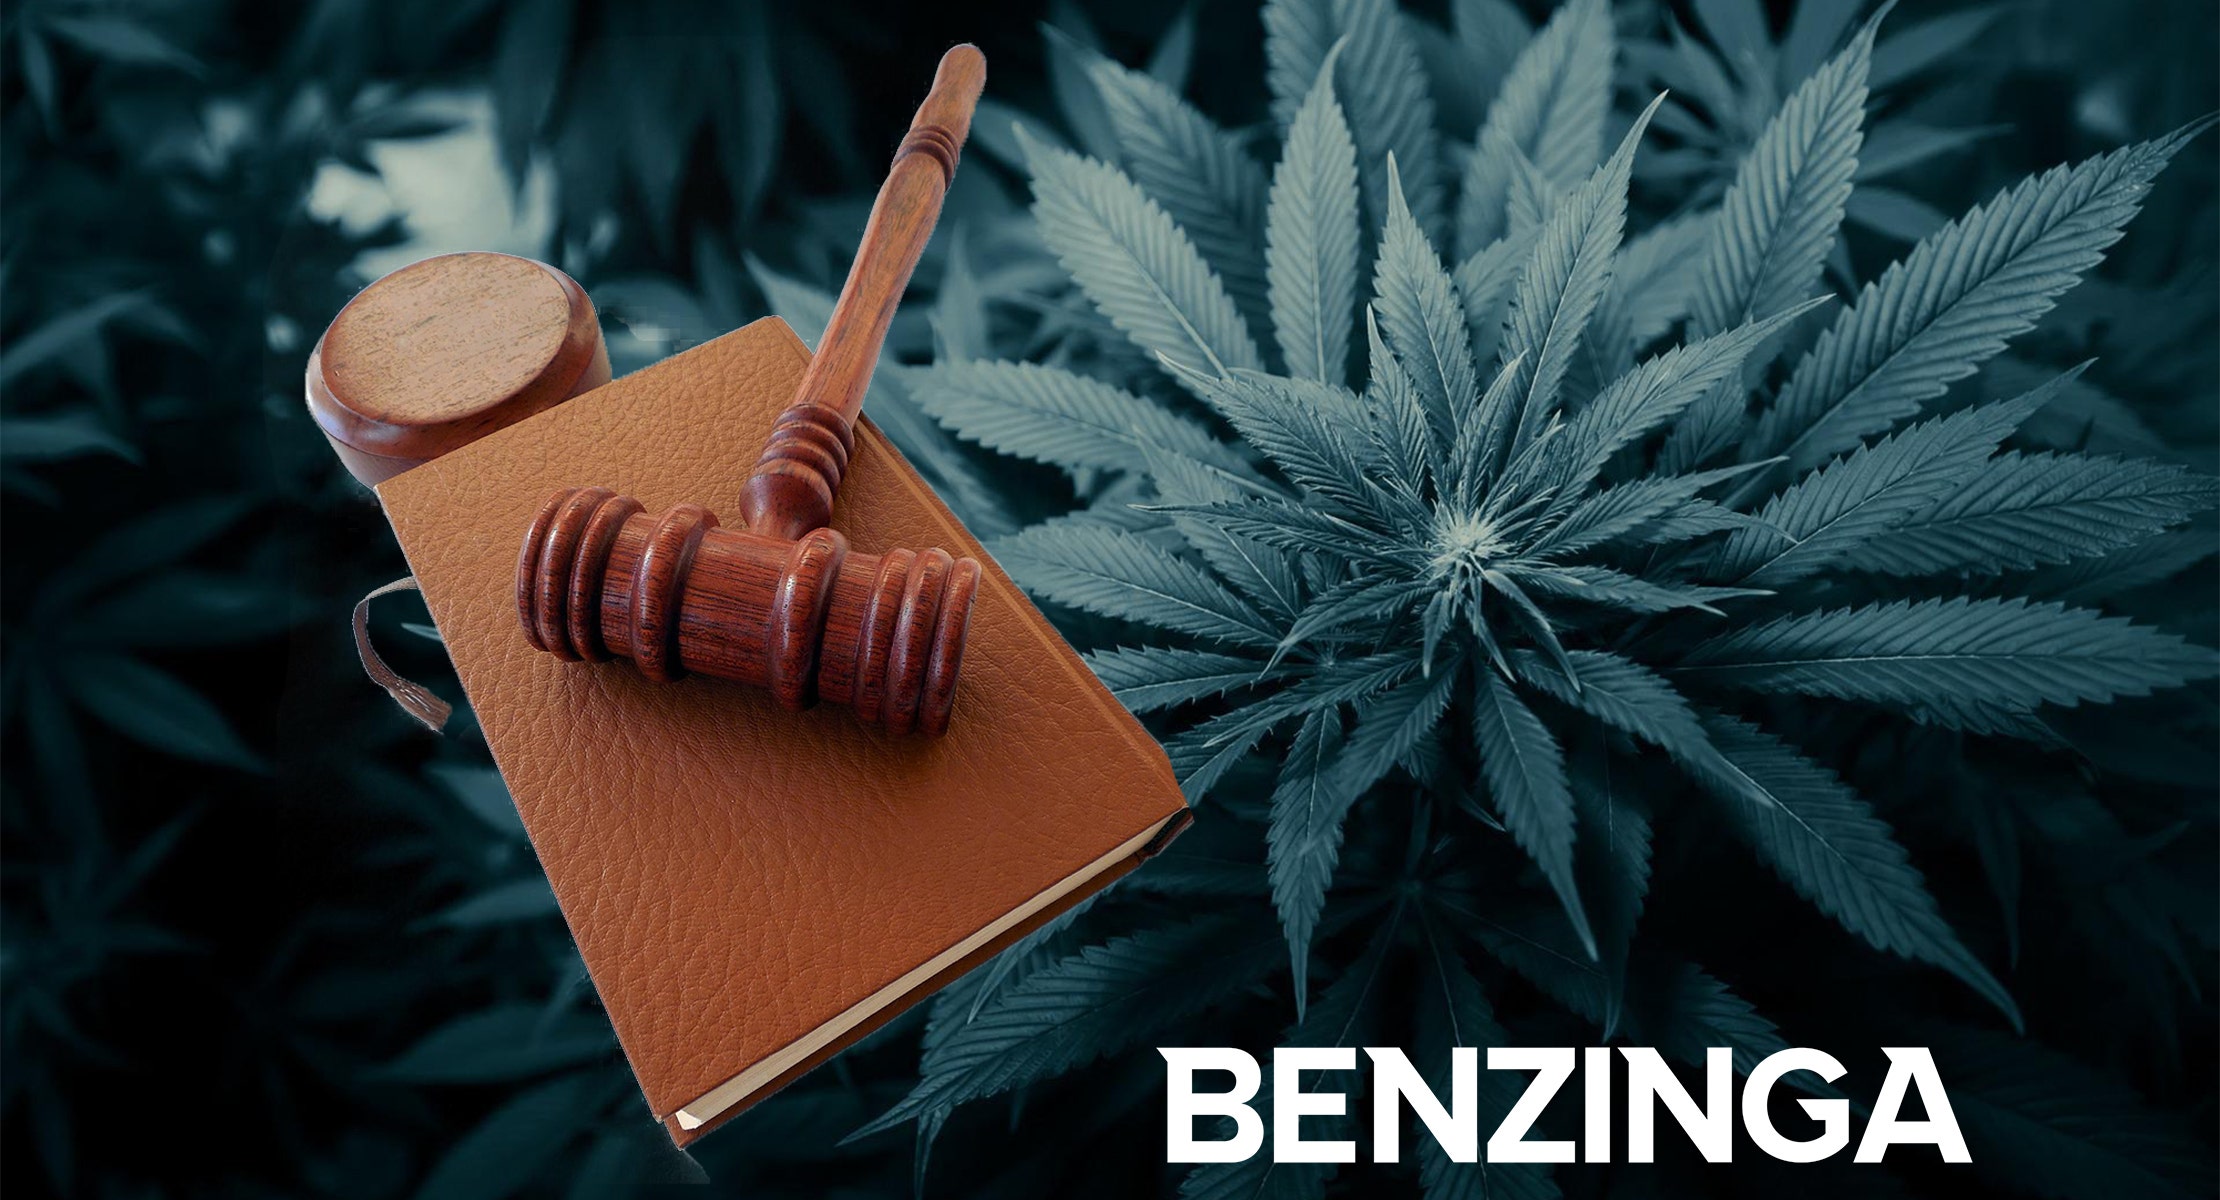 Cannabis Policy News: Australia City Decriminalizes Cocaine And Heroin, Hong Kong To Ban CBD, Missouri Legalization Ad Featuring Police Officers